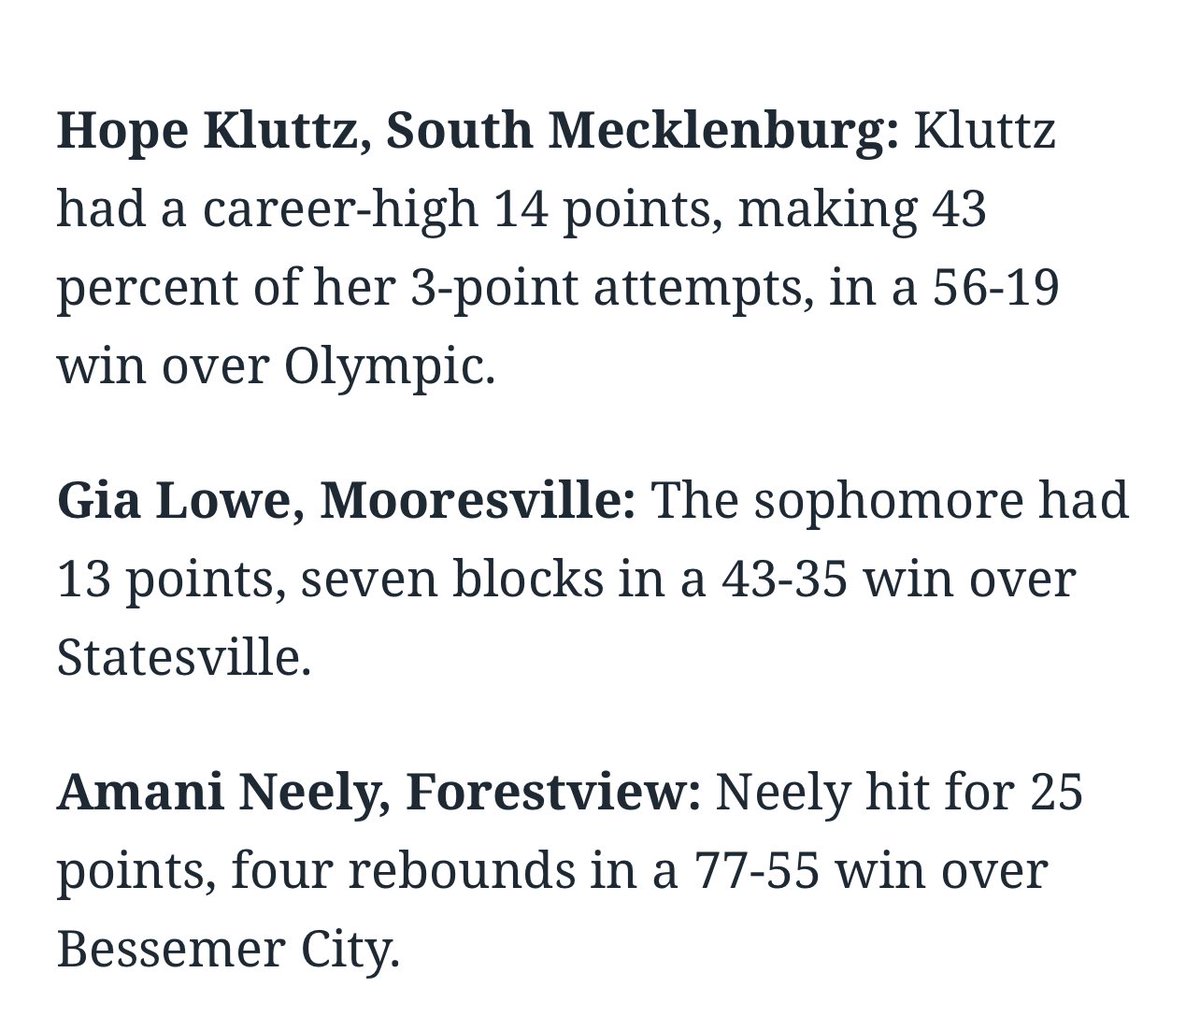 Mooresville Women’s 🏀 want to shout out Gia Lowe for being recognized as a Top Performer in the Charlotte area last night. Gia had 13 pts, 11 rebounds, and 7 blocks! Way to go Gia!🤍💙 #berelentless